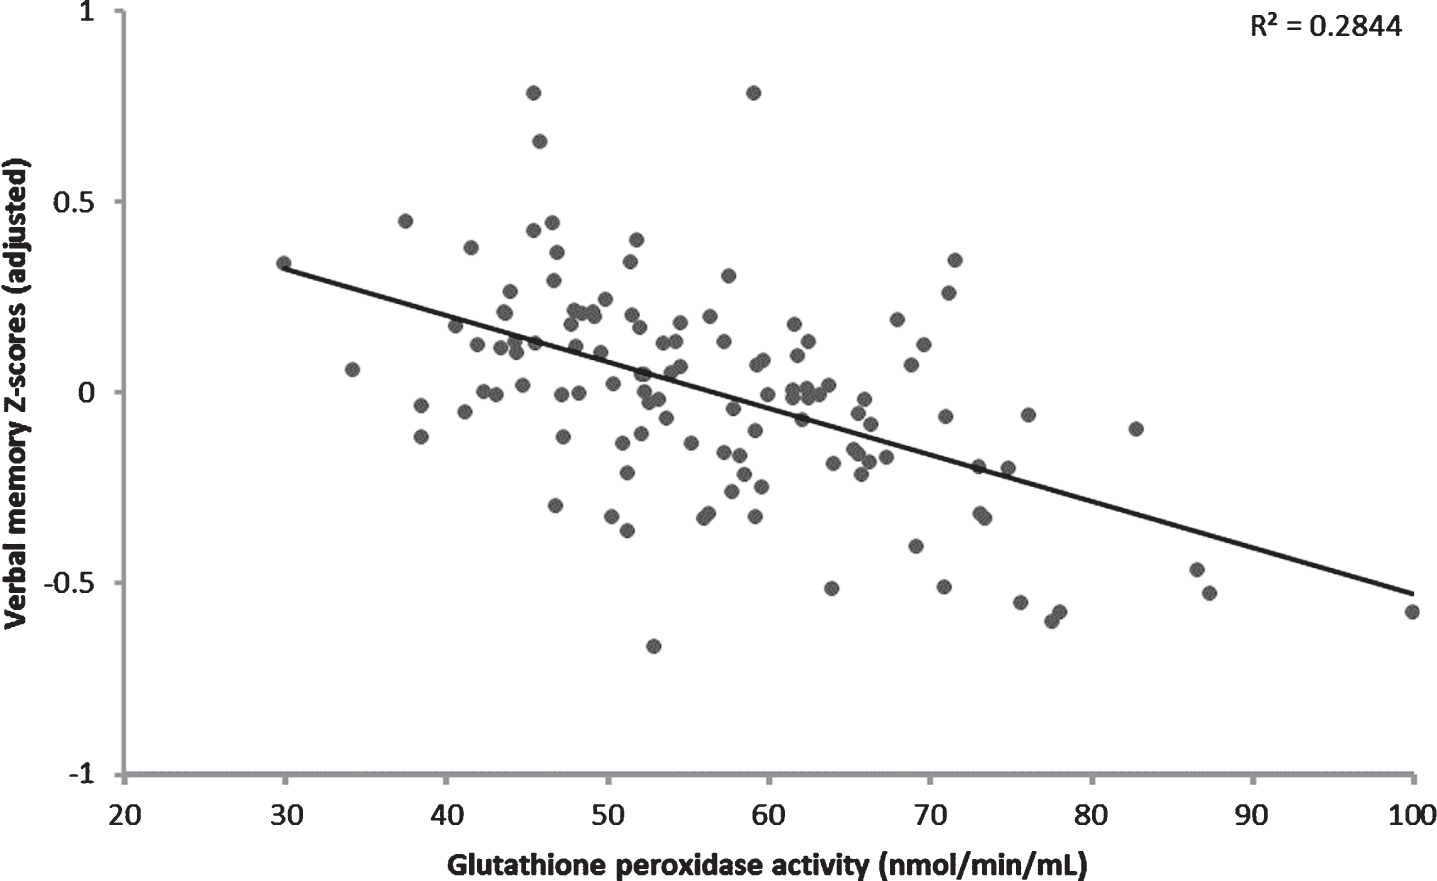 Higher glutathione peroxidase activity was significantly associated with poorer verbal memory performance at baseline in coronary artery disease patients. Covariates included in this model include: sex, body mass index, cardiopulmonary fitness (VO2 peak), and years of education.